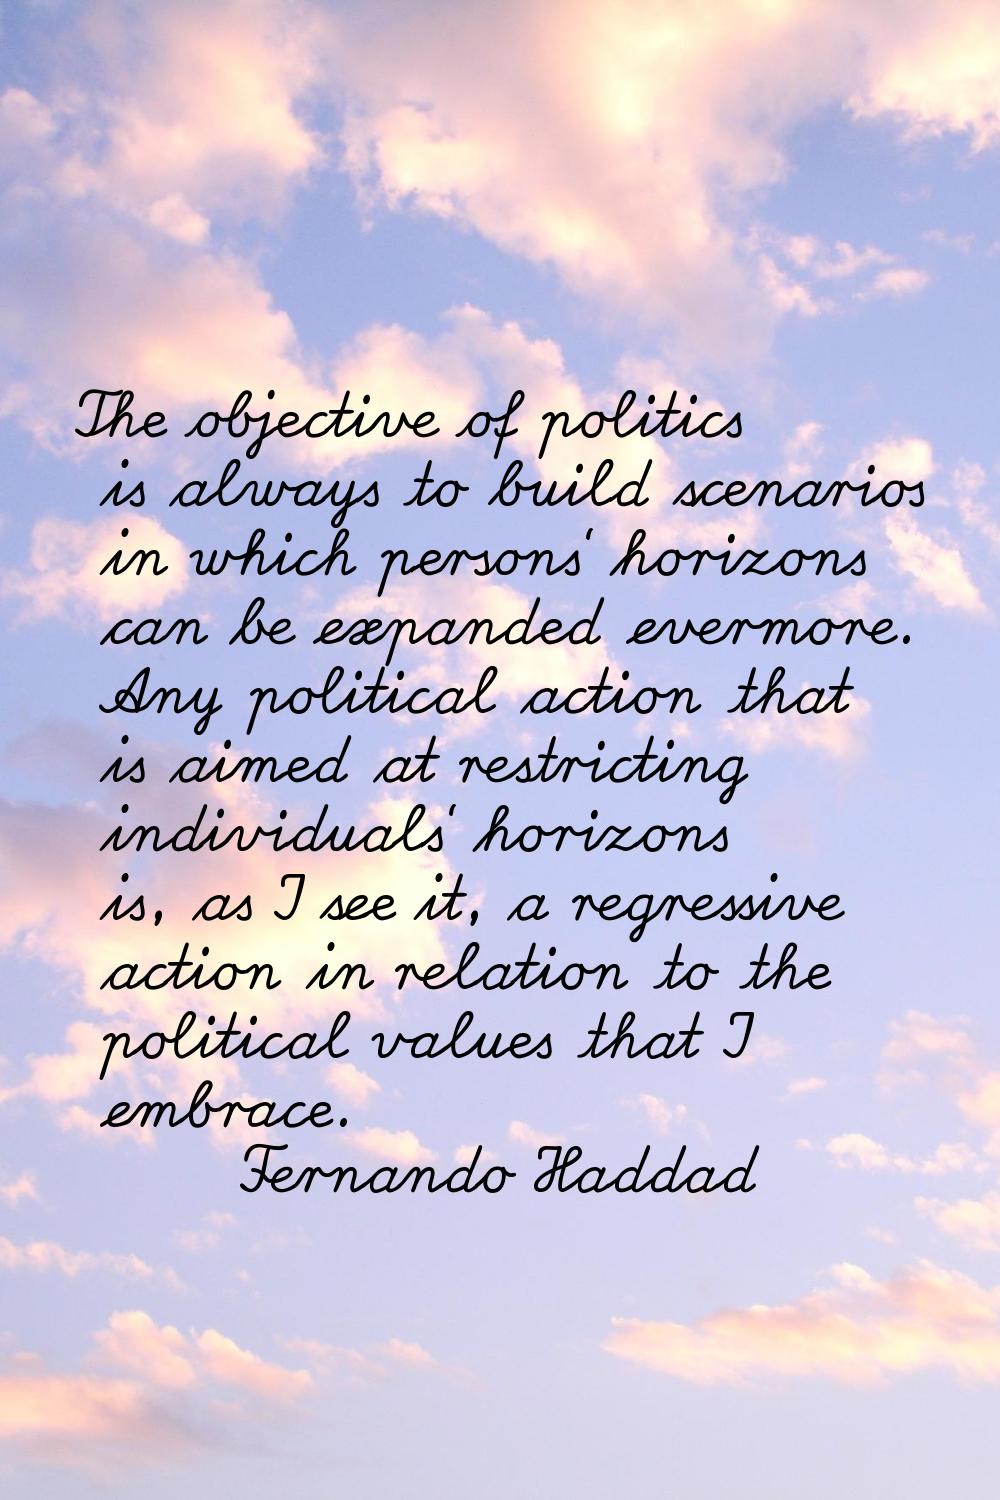 The objective of politics is always to build scenarios in which persons' horizons can be expanded e